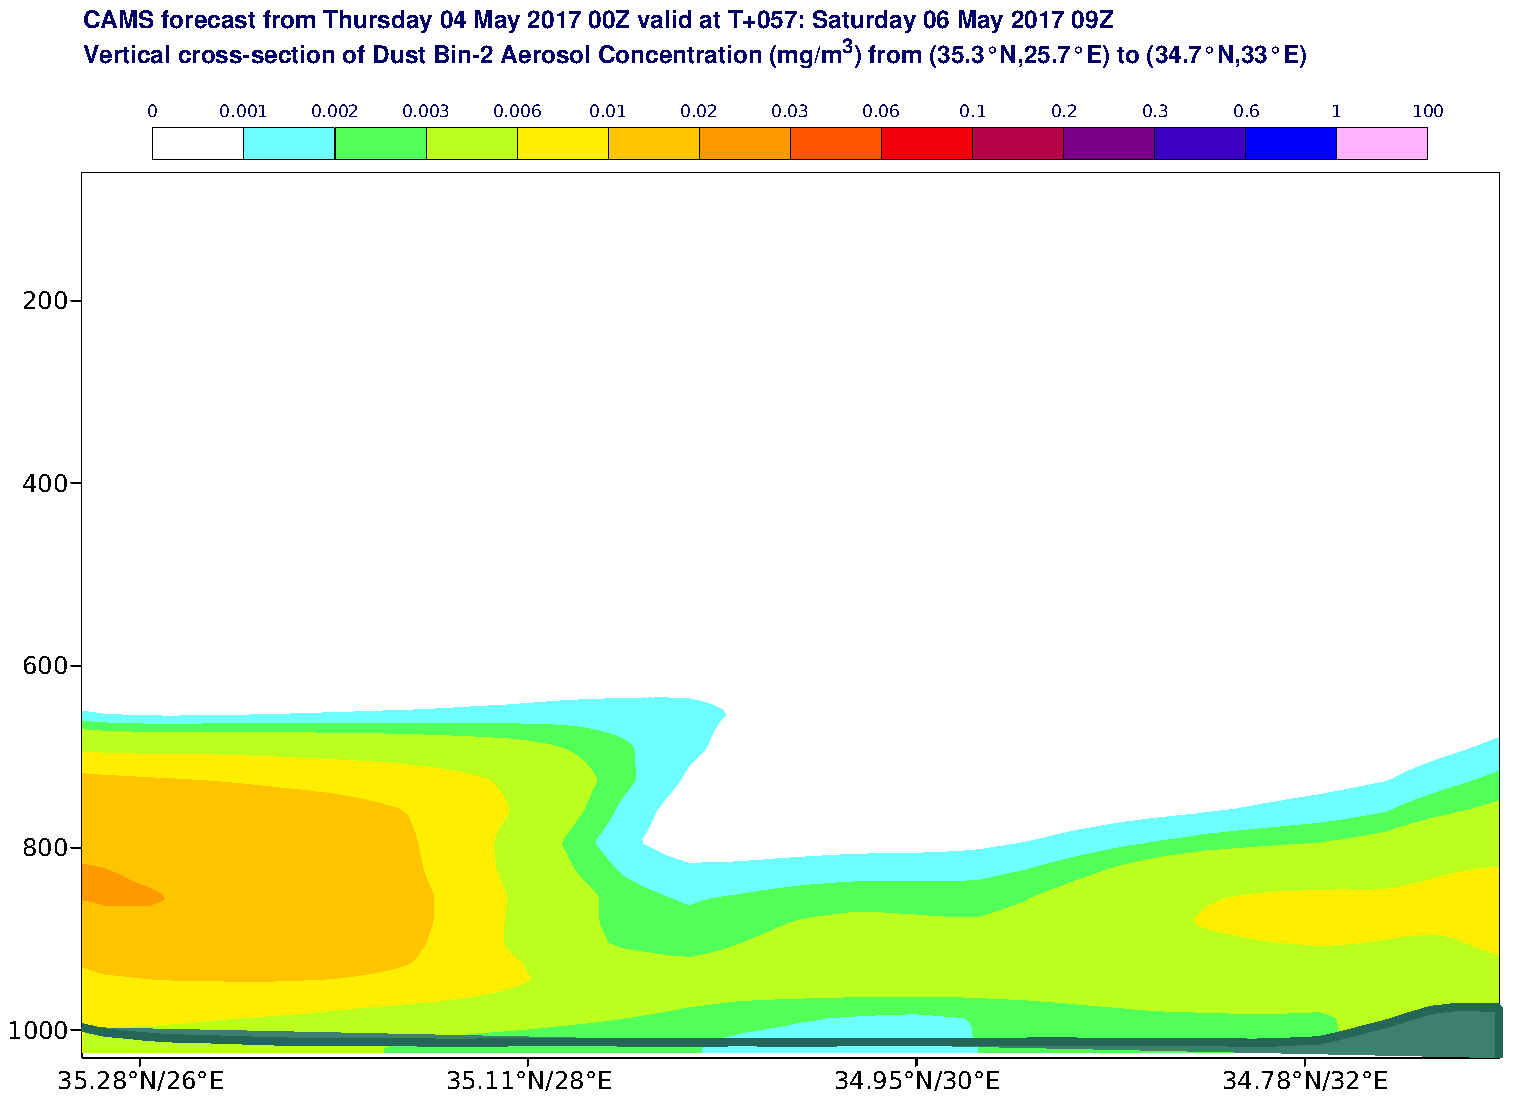 Vertical cross-section of Dust Bin-2 Aerosol Concentration (mg/m3) valid at T57 - 2017-05-06 09:00